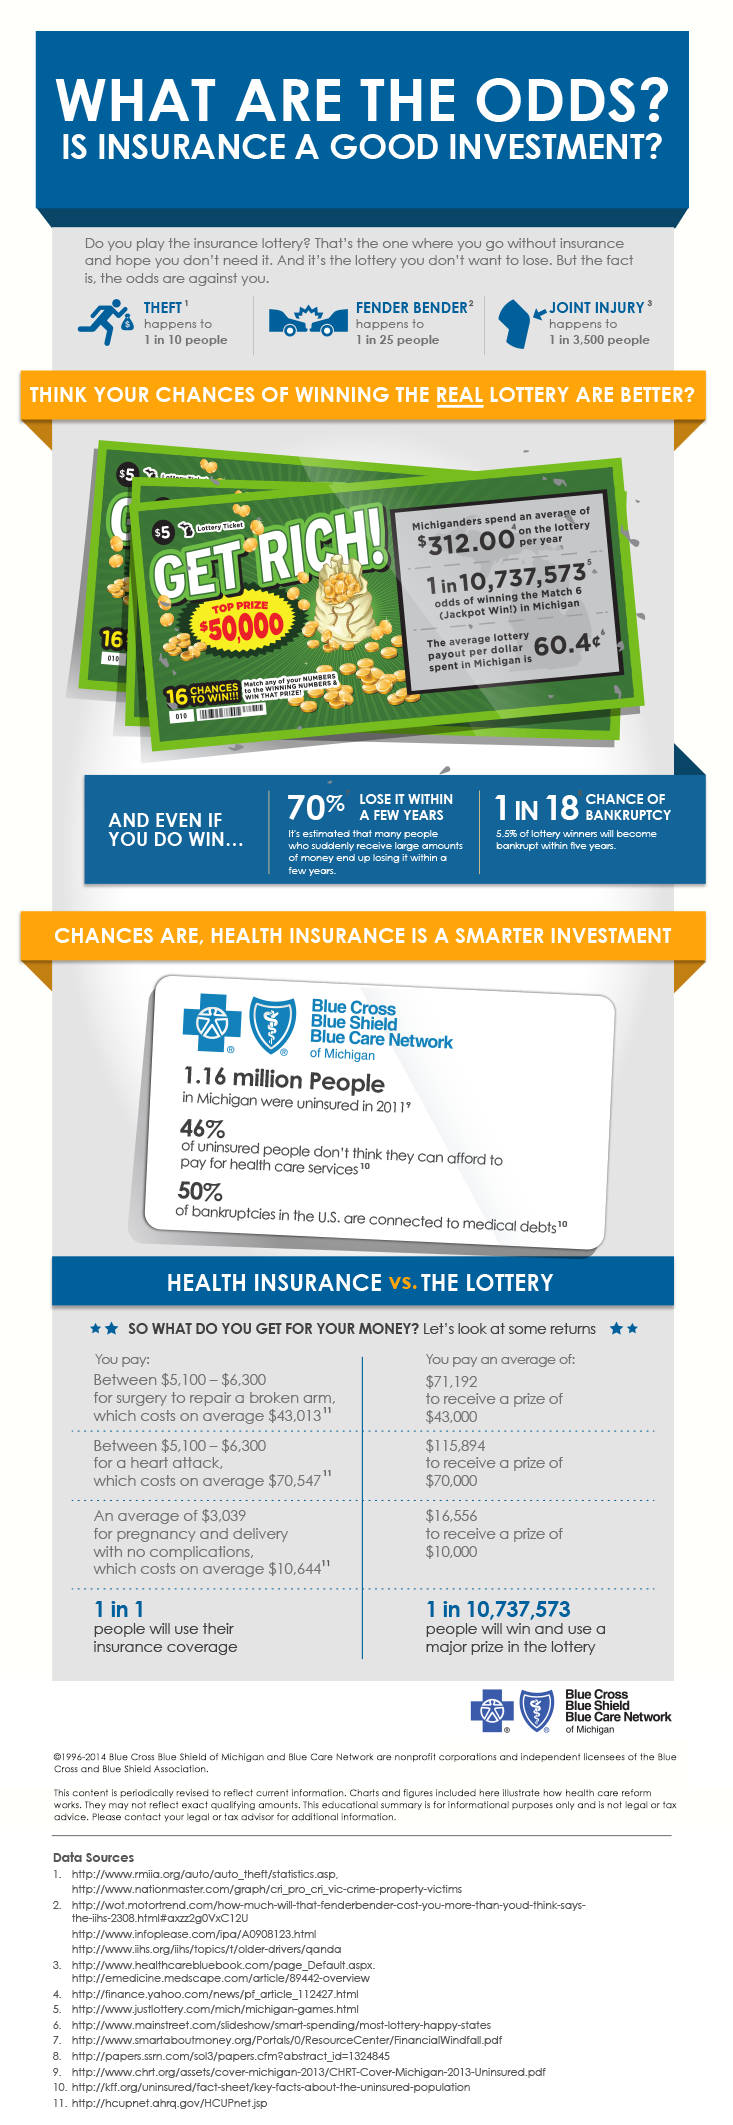 This Health Insurance 101 infographic explains why health insurance is a smart investment.